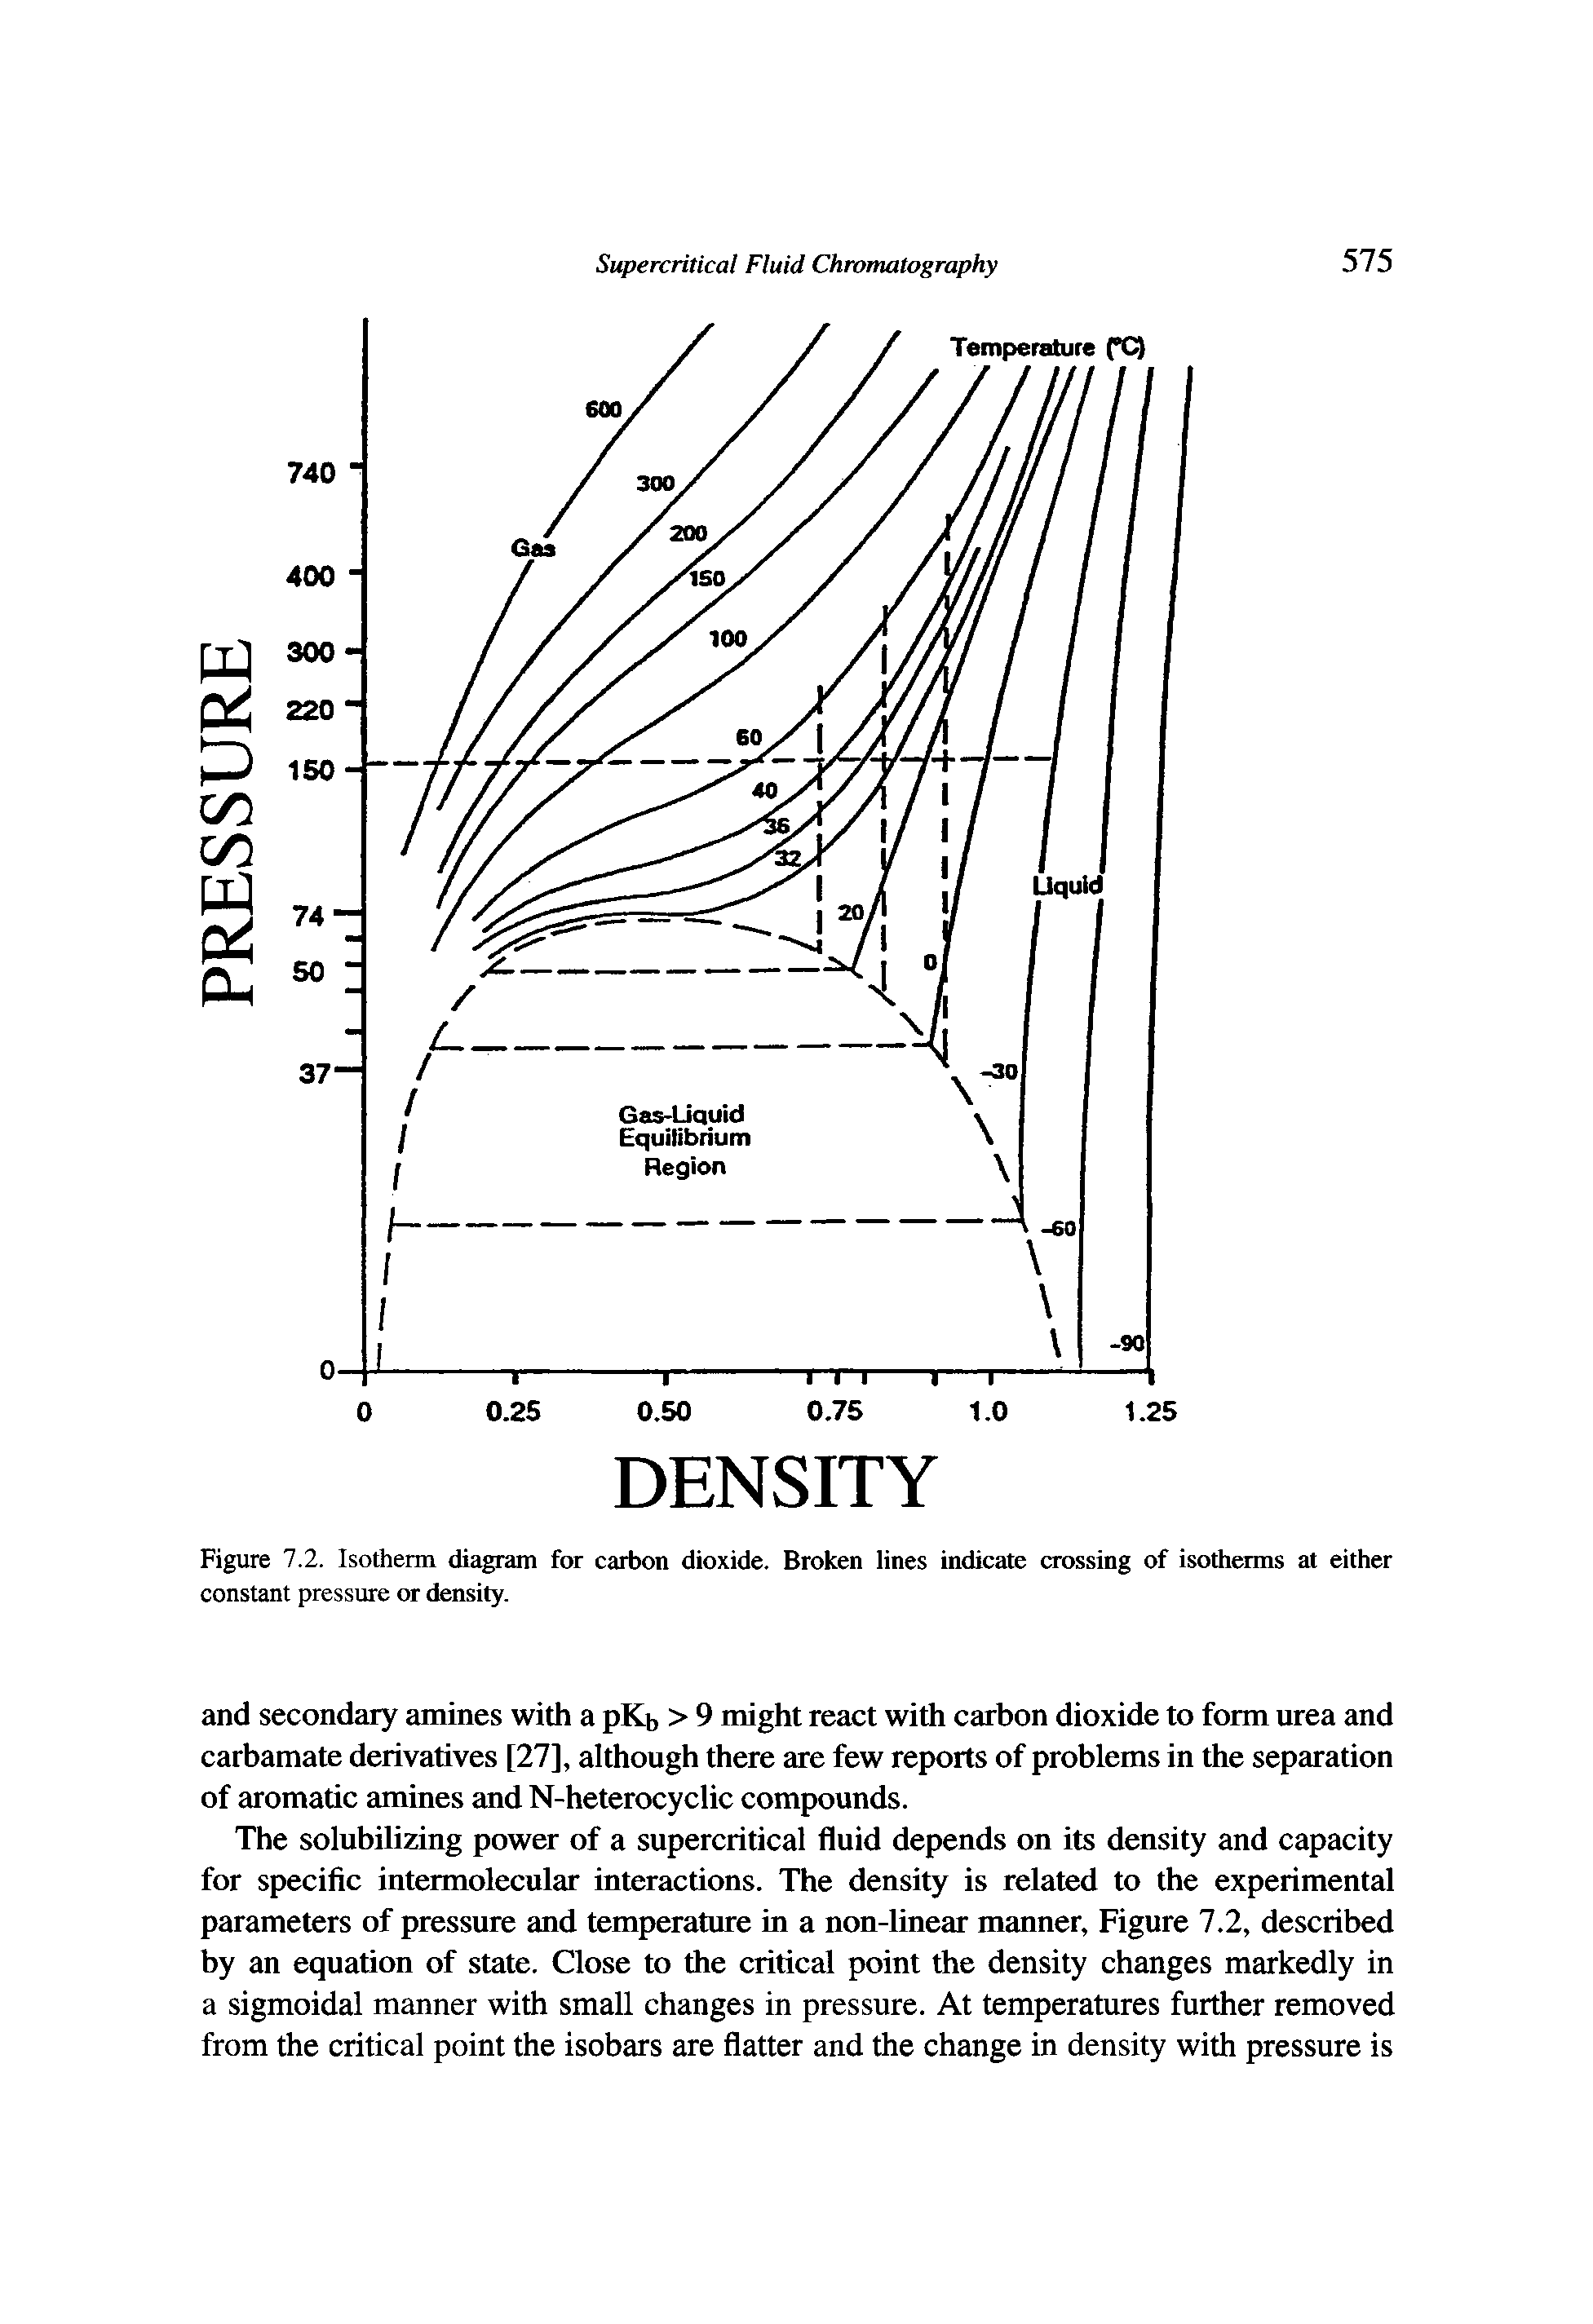 Figure 7.2. Isotherm diagram for carbon dioxide. Broken lines indicate crossing of isotherms at either constant pressure or density.